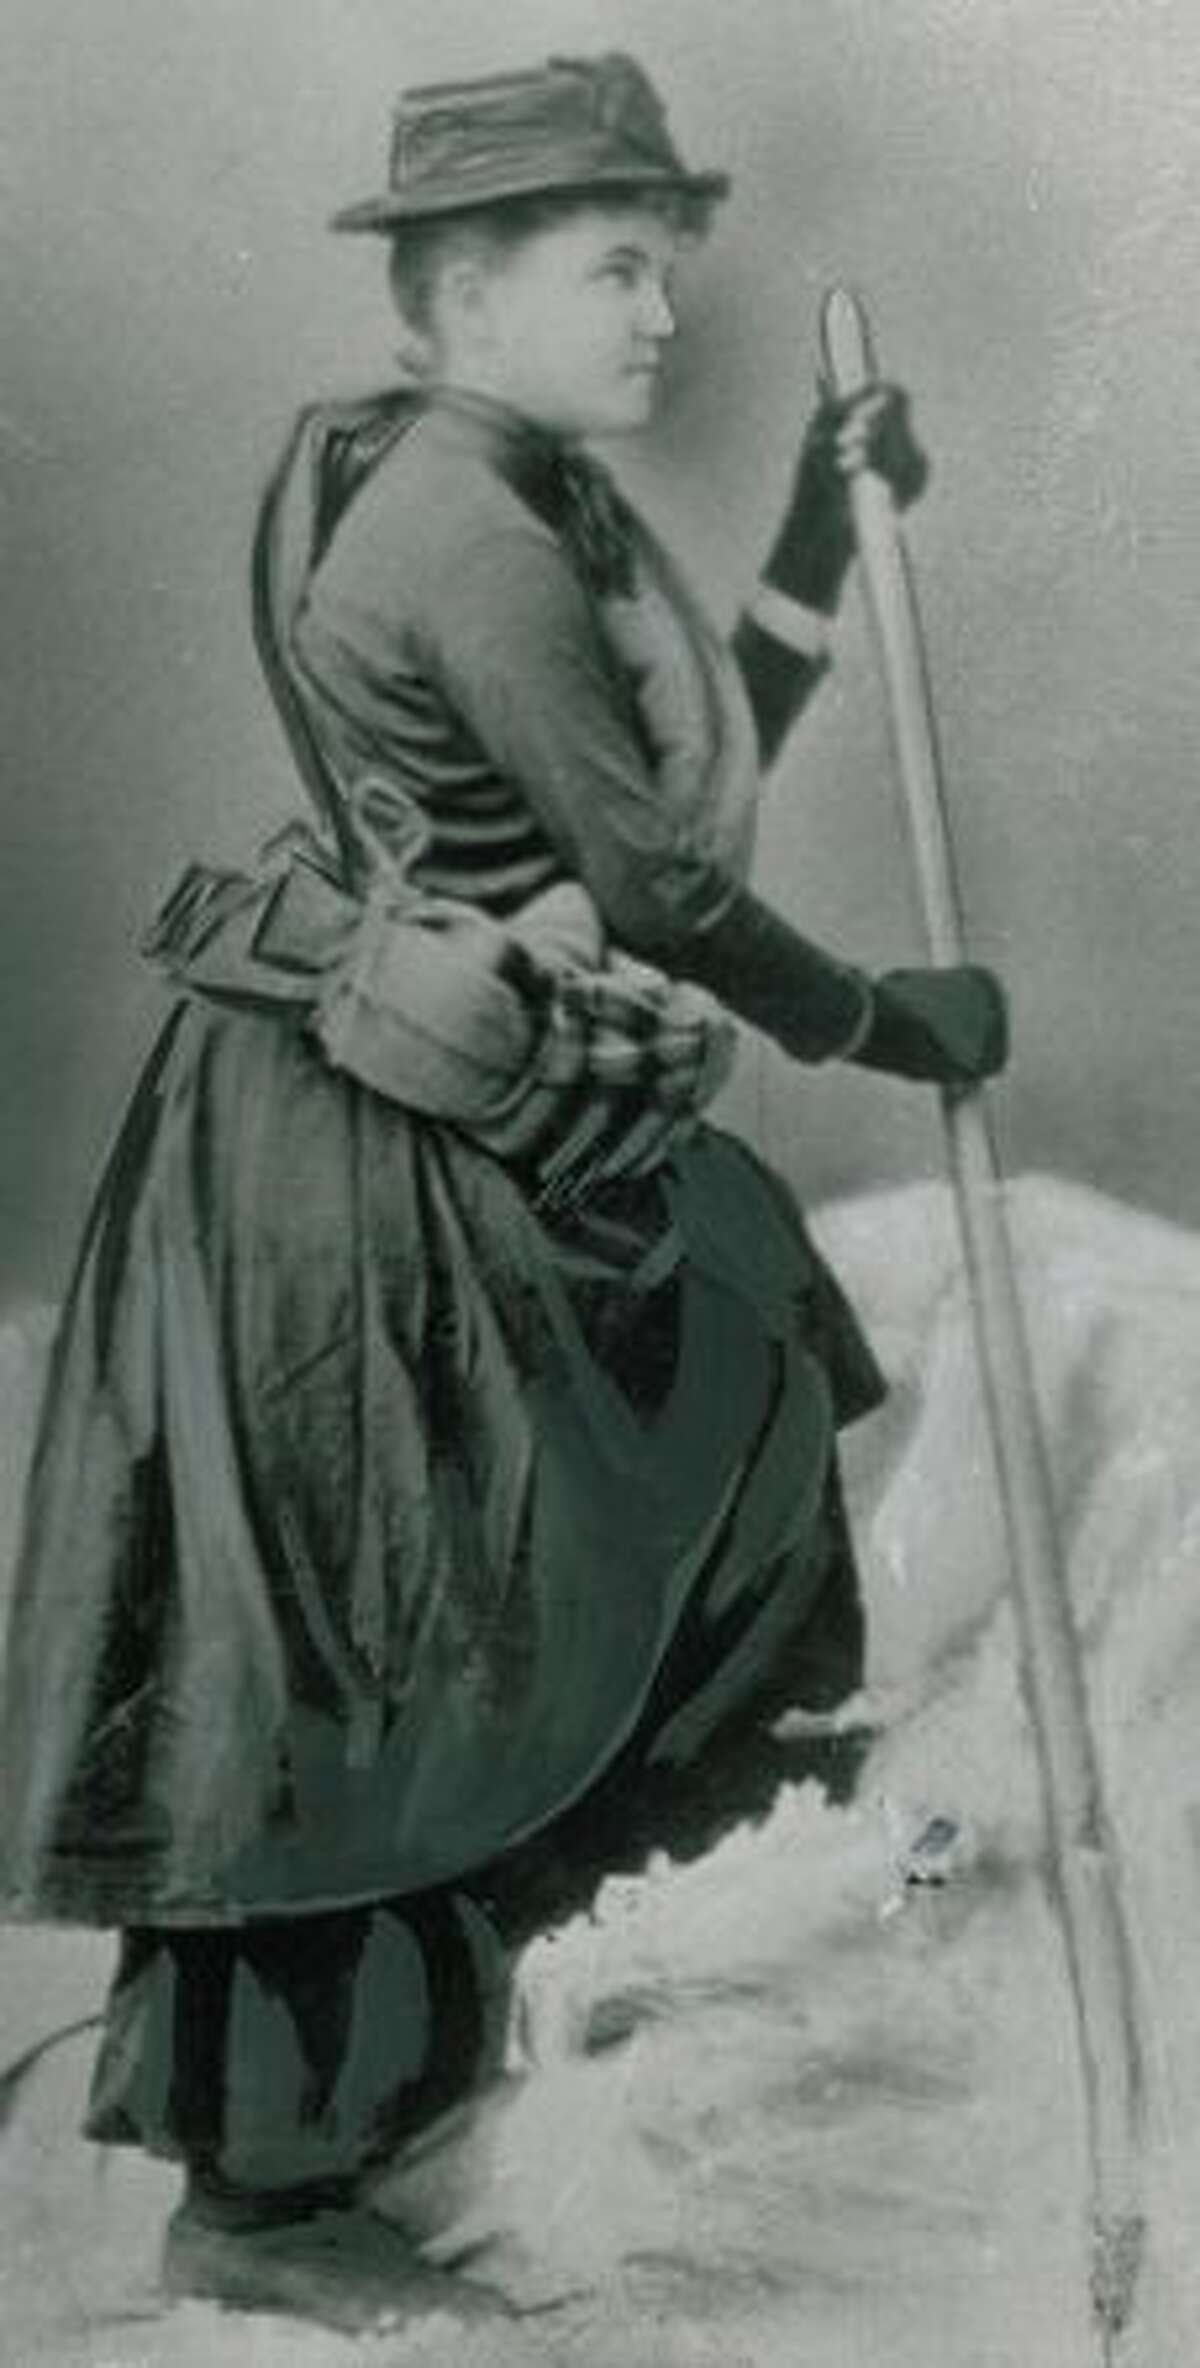 Fay Fuller was the first woman to climb Mount Rainier. She made the climb to the summit in 1890.